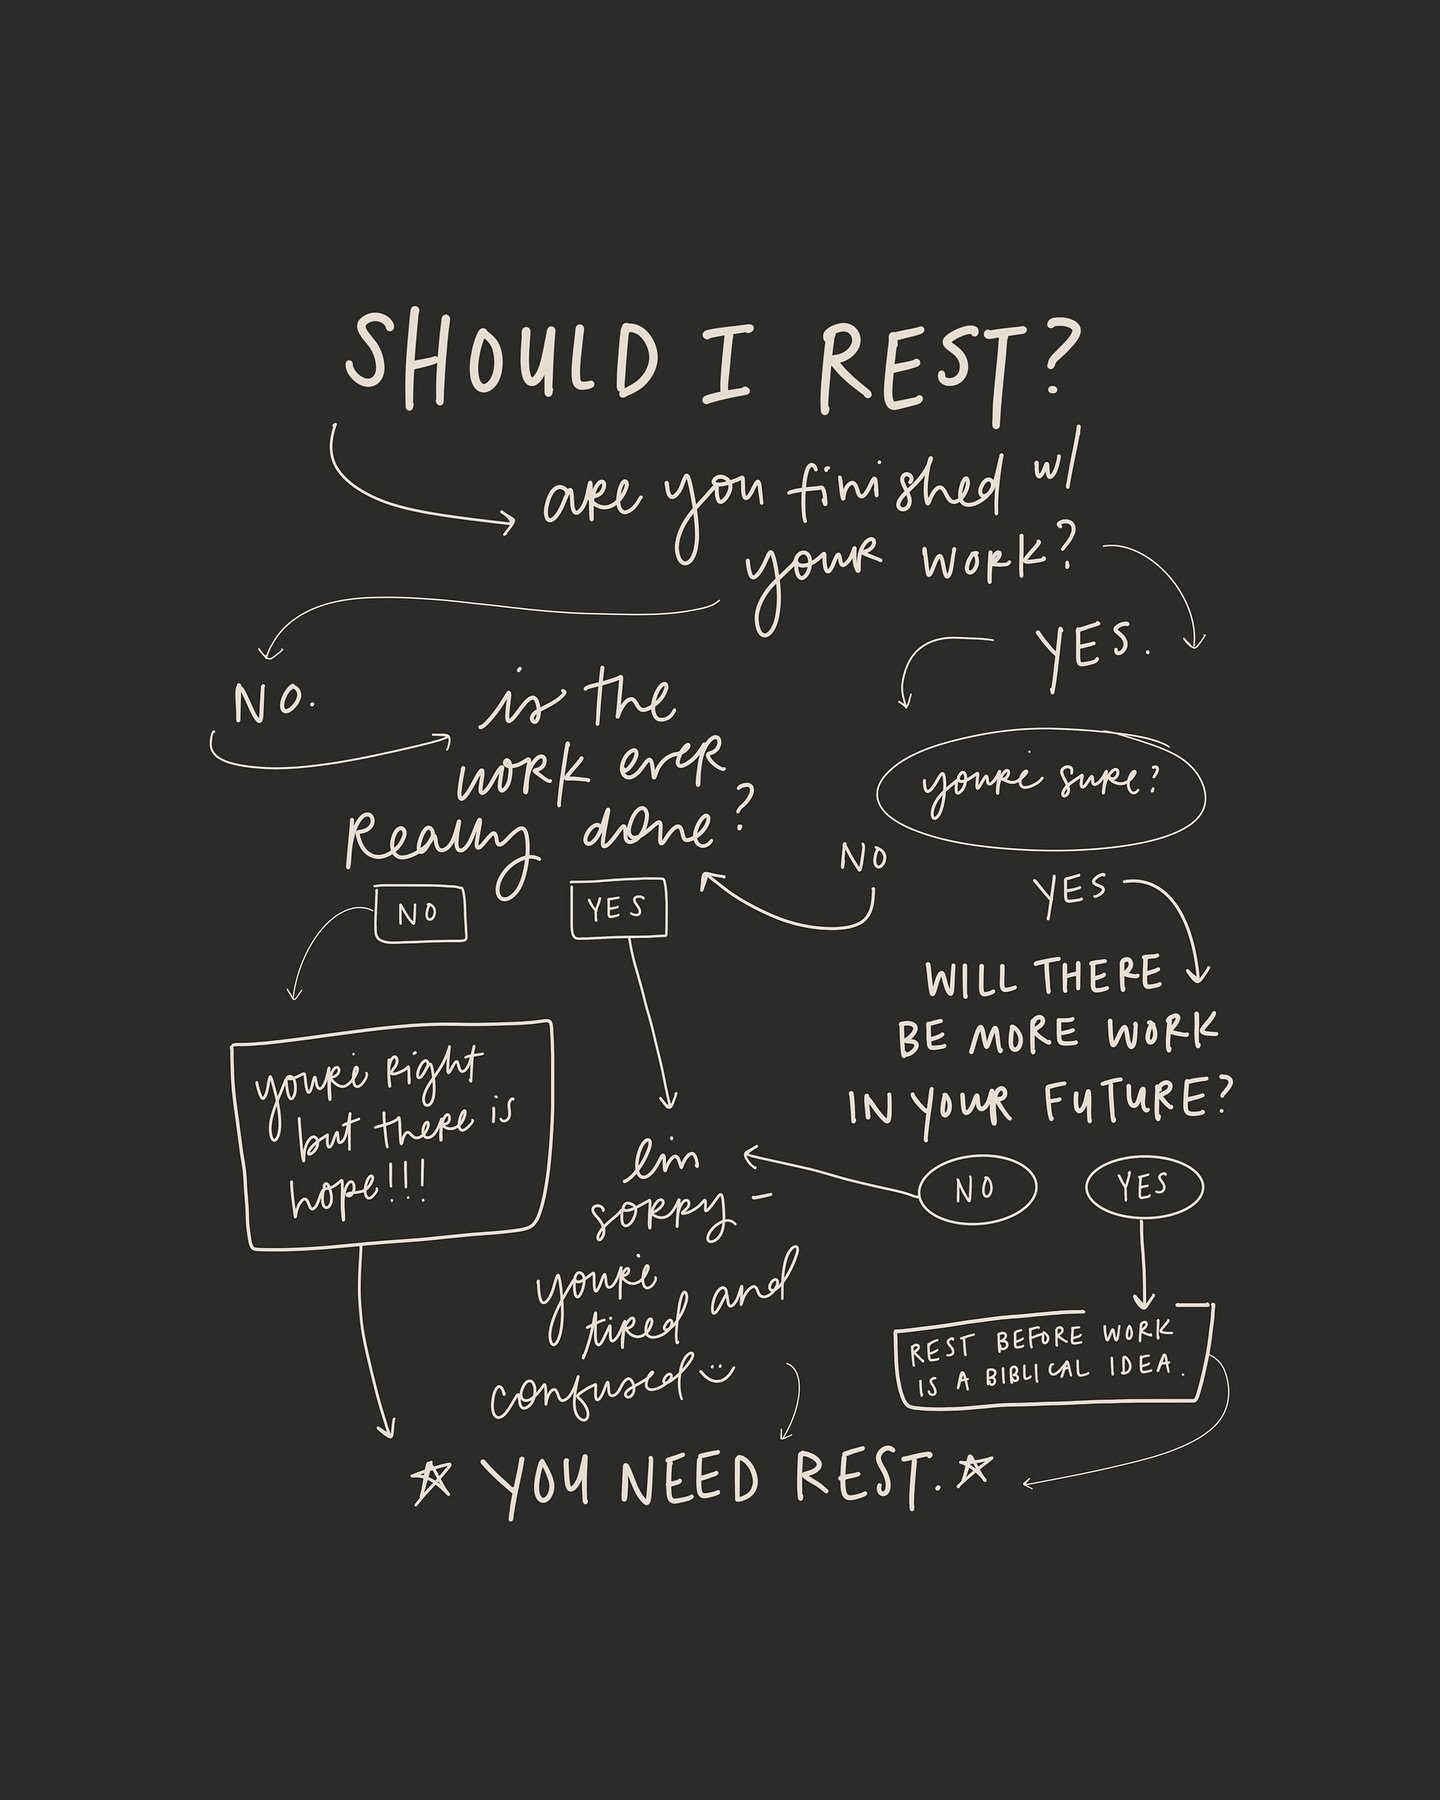 Wondering if you need rest? I made it clear for you!
⠀⠀⠀⠀⠀⠀⠀⠀⠀
We rest when we&rsquo;re tired, before we feel like we&rsquo;ve earned it, and before we work because that&rsquo;s biblical. We rest when it doesn&rsquo;t make sense&mdash;because we don&